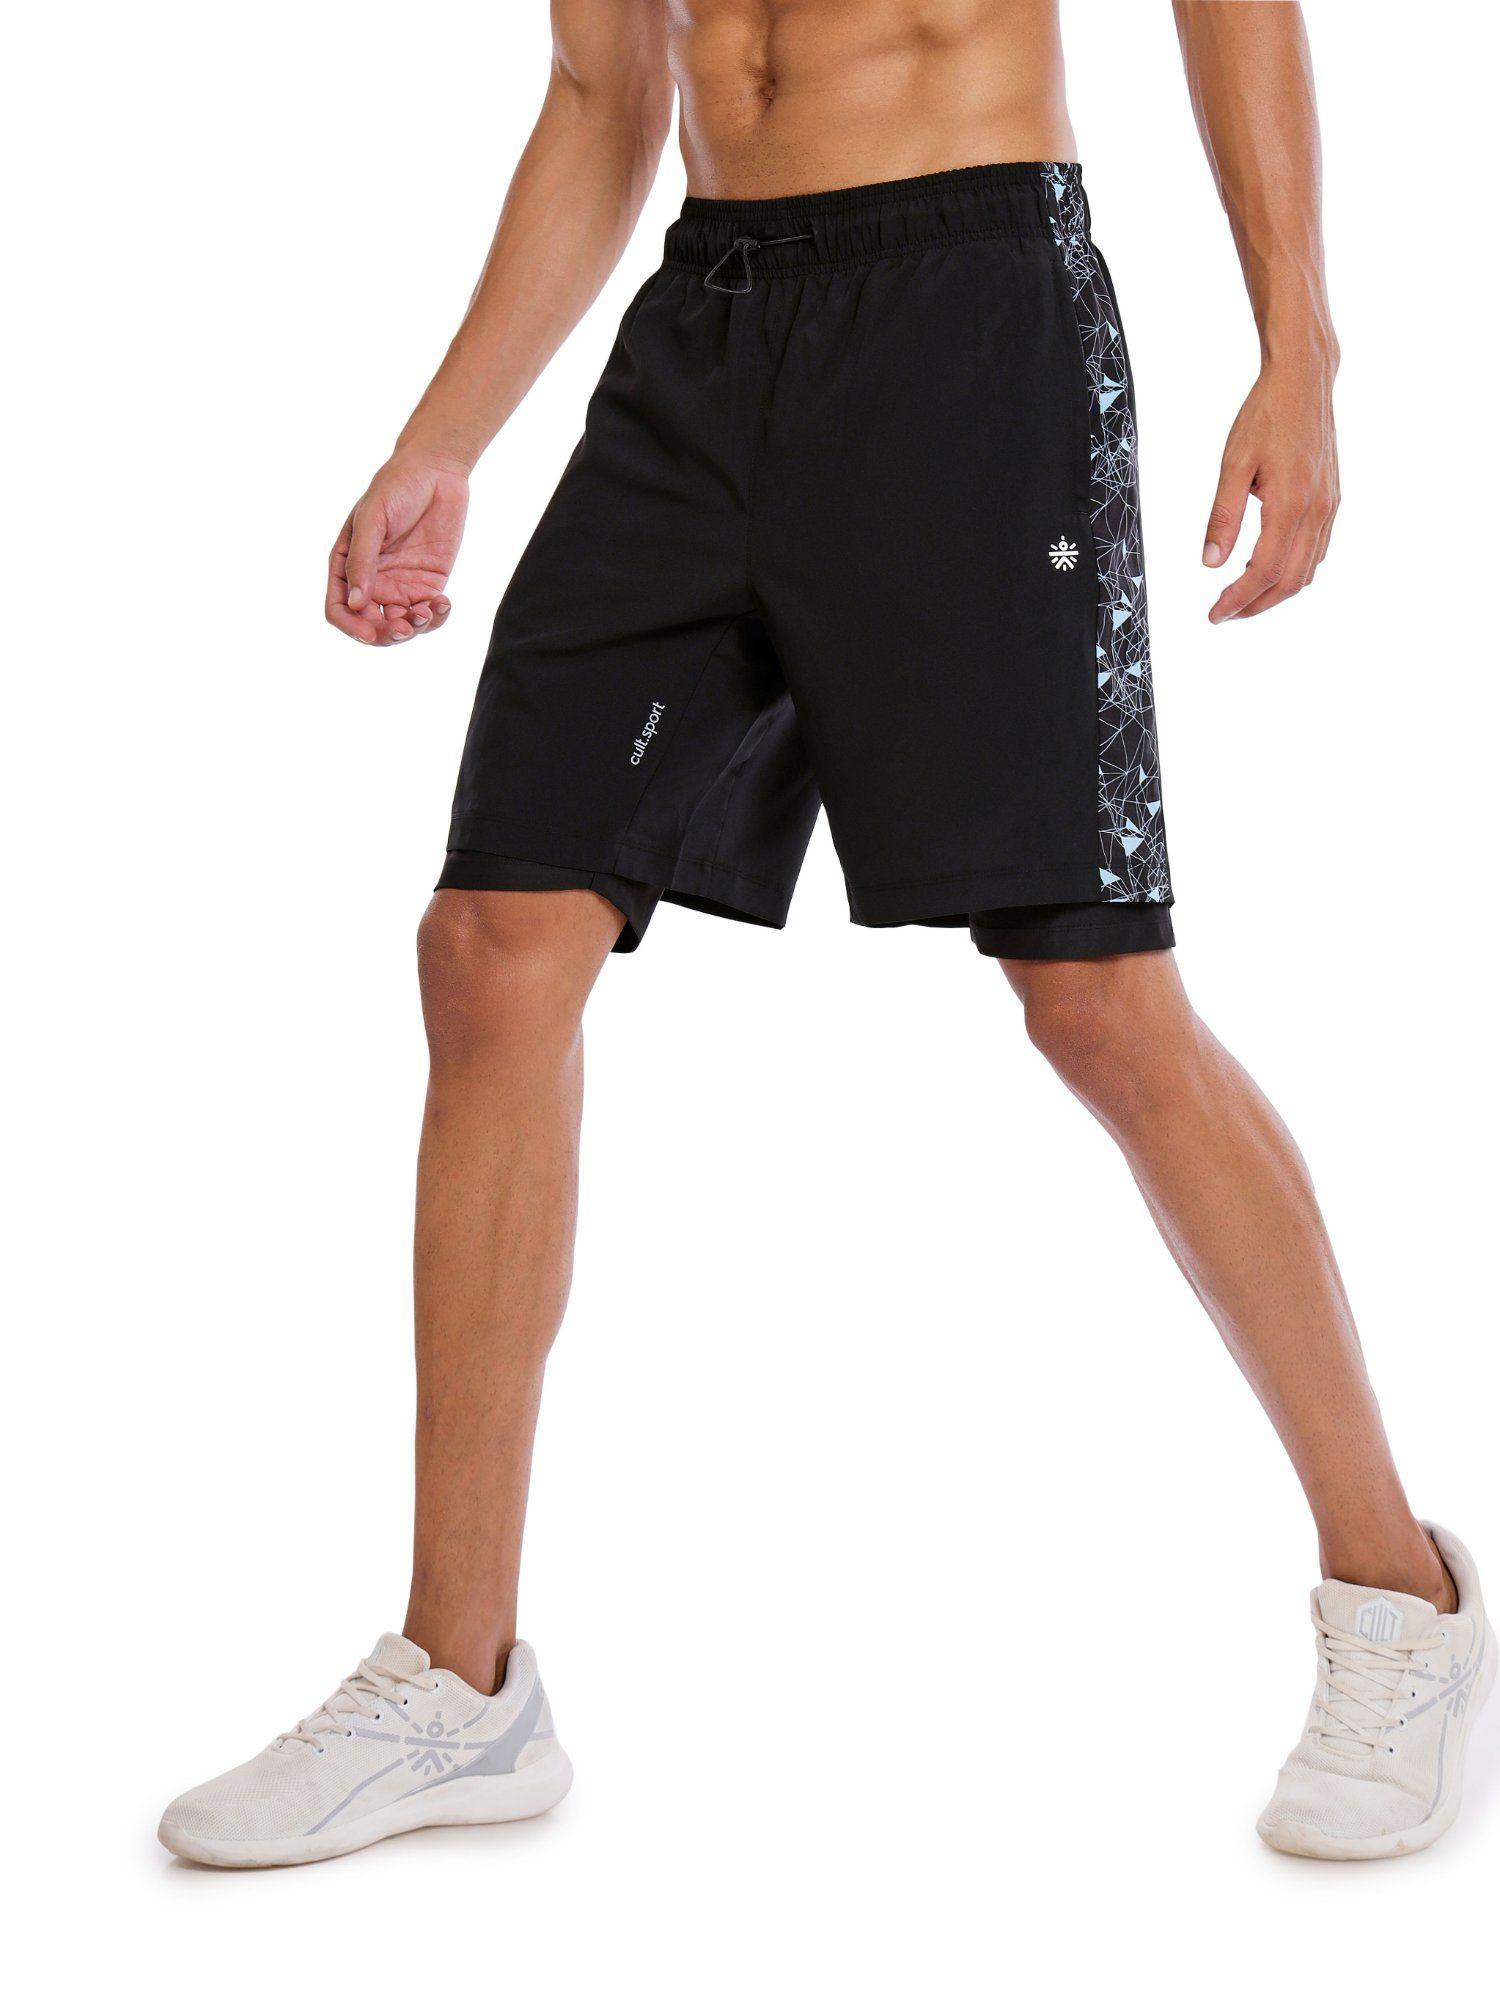 Graphic Running Shorts with Inner Tights